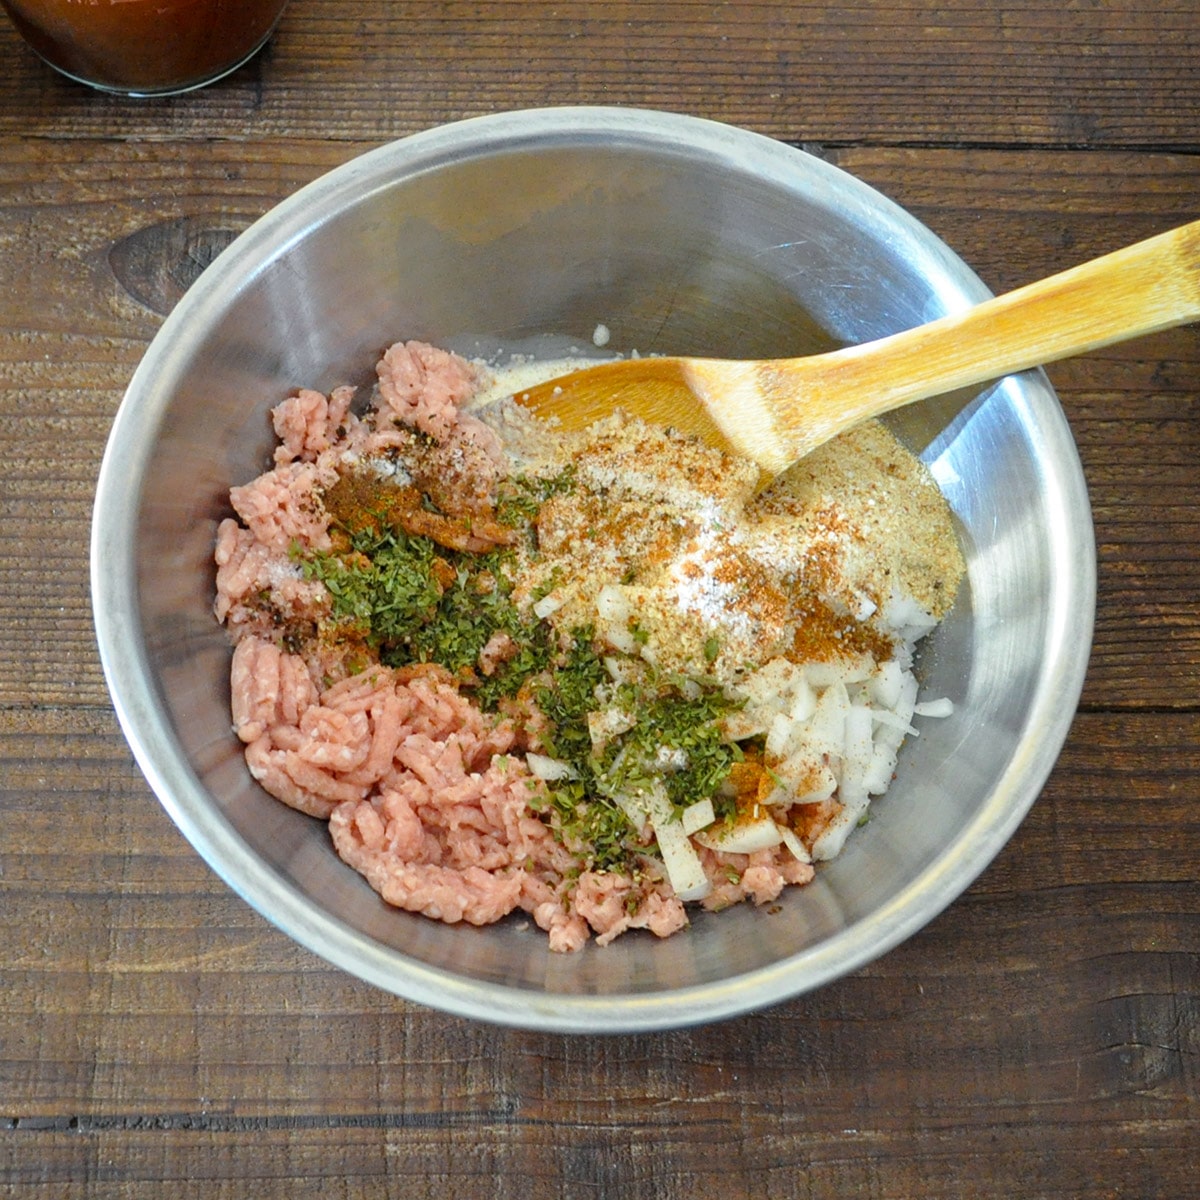 raw ground turkey, onion, bread crumbs, and spices in a metal bowl